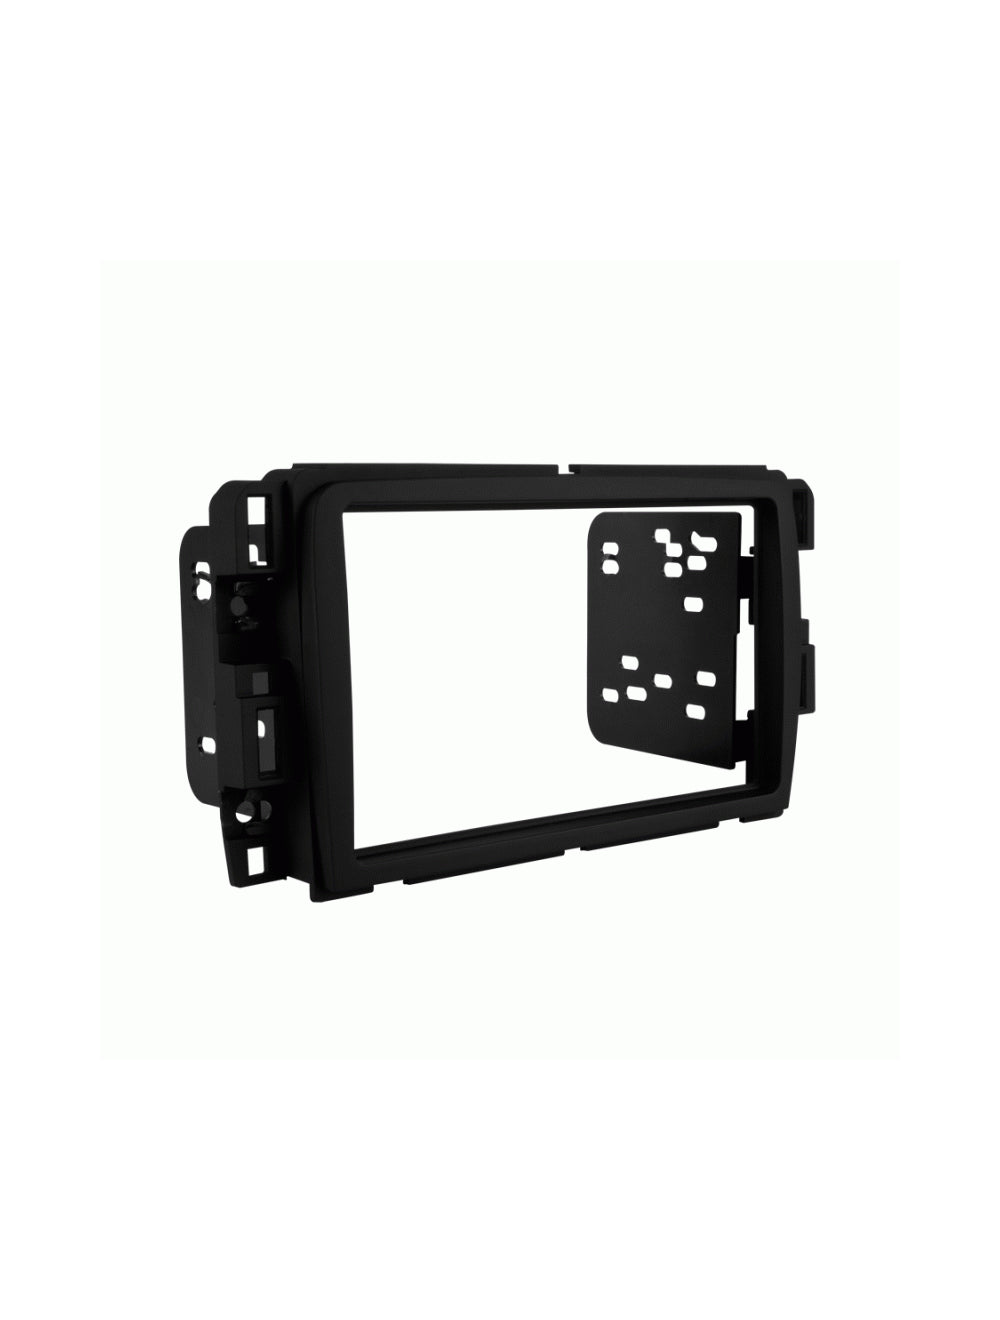 Metra 95-3310B Double Din Installation Kit for 2013-Up Traverse, Acadia Black